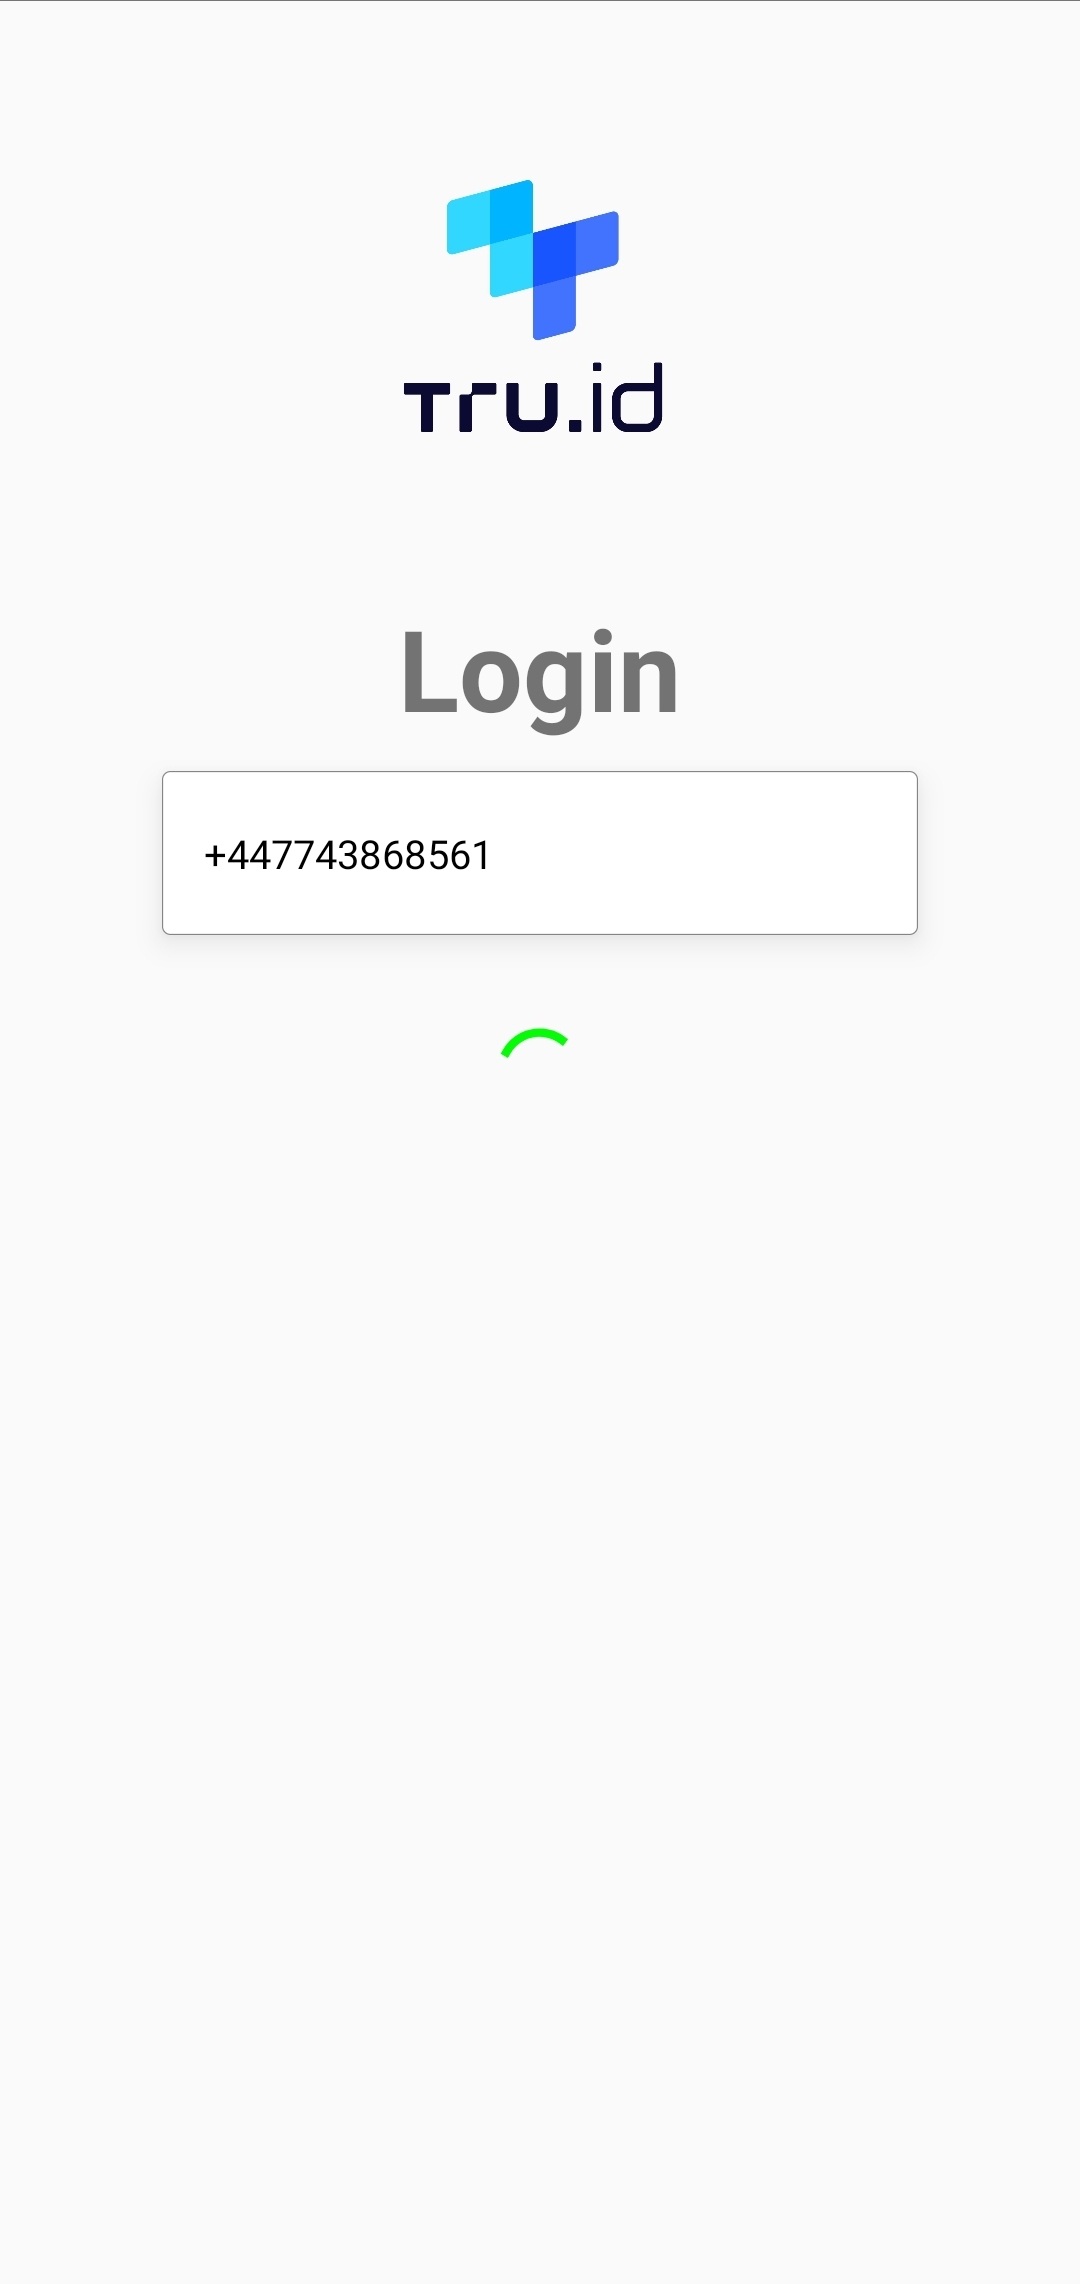 A tru.ID mobile app screen with the tru.ID logo, a phone number text input, and a loading indicator.